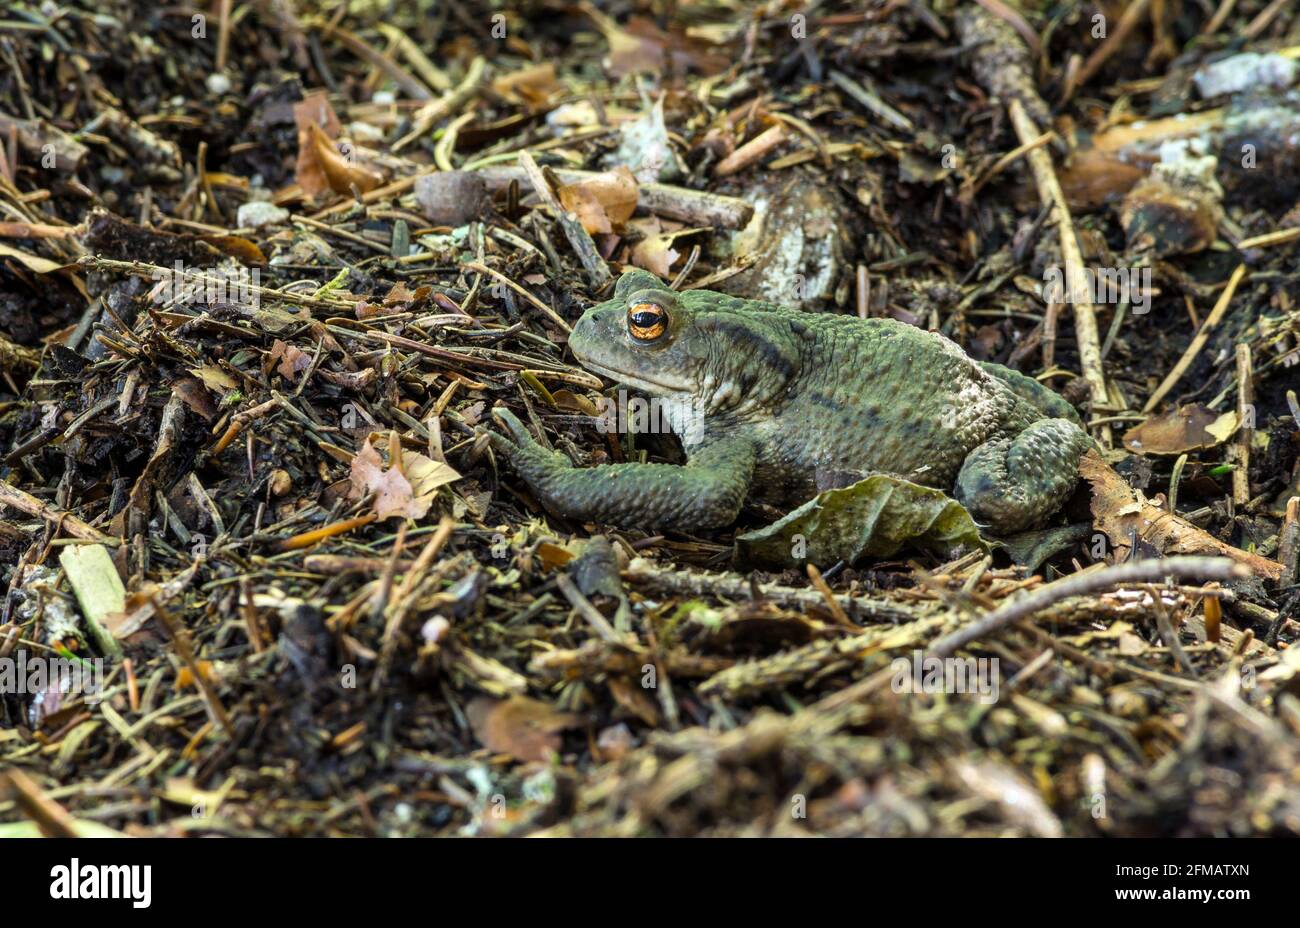 Germany, Baden-Wuerttemberg, common toad, Bufo bufo, specially protected species. Stock Photo